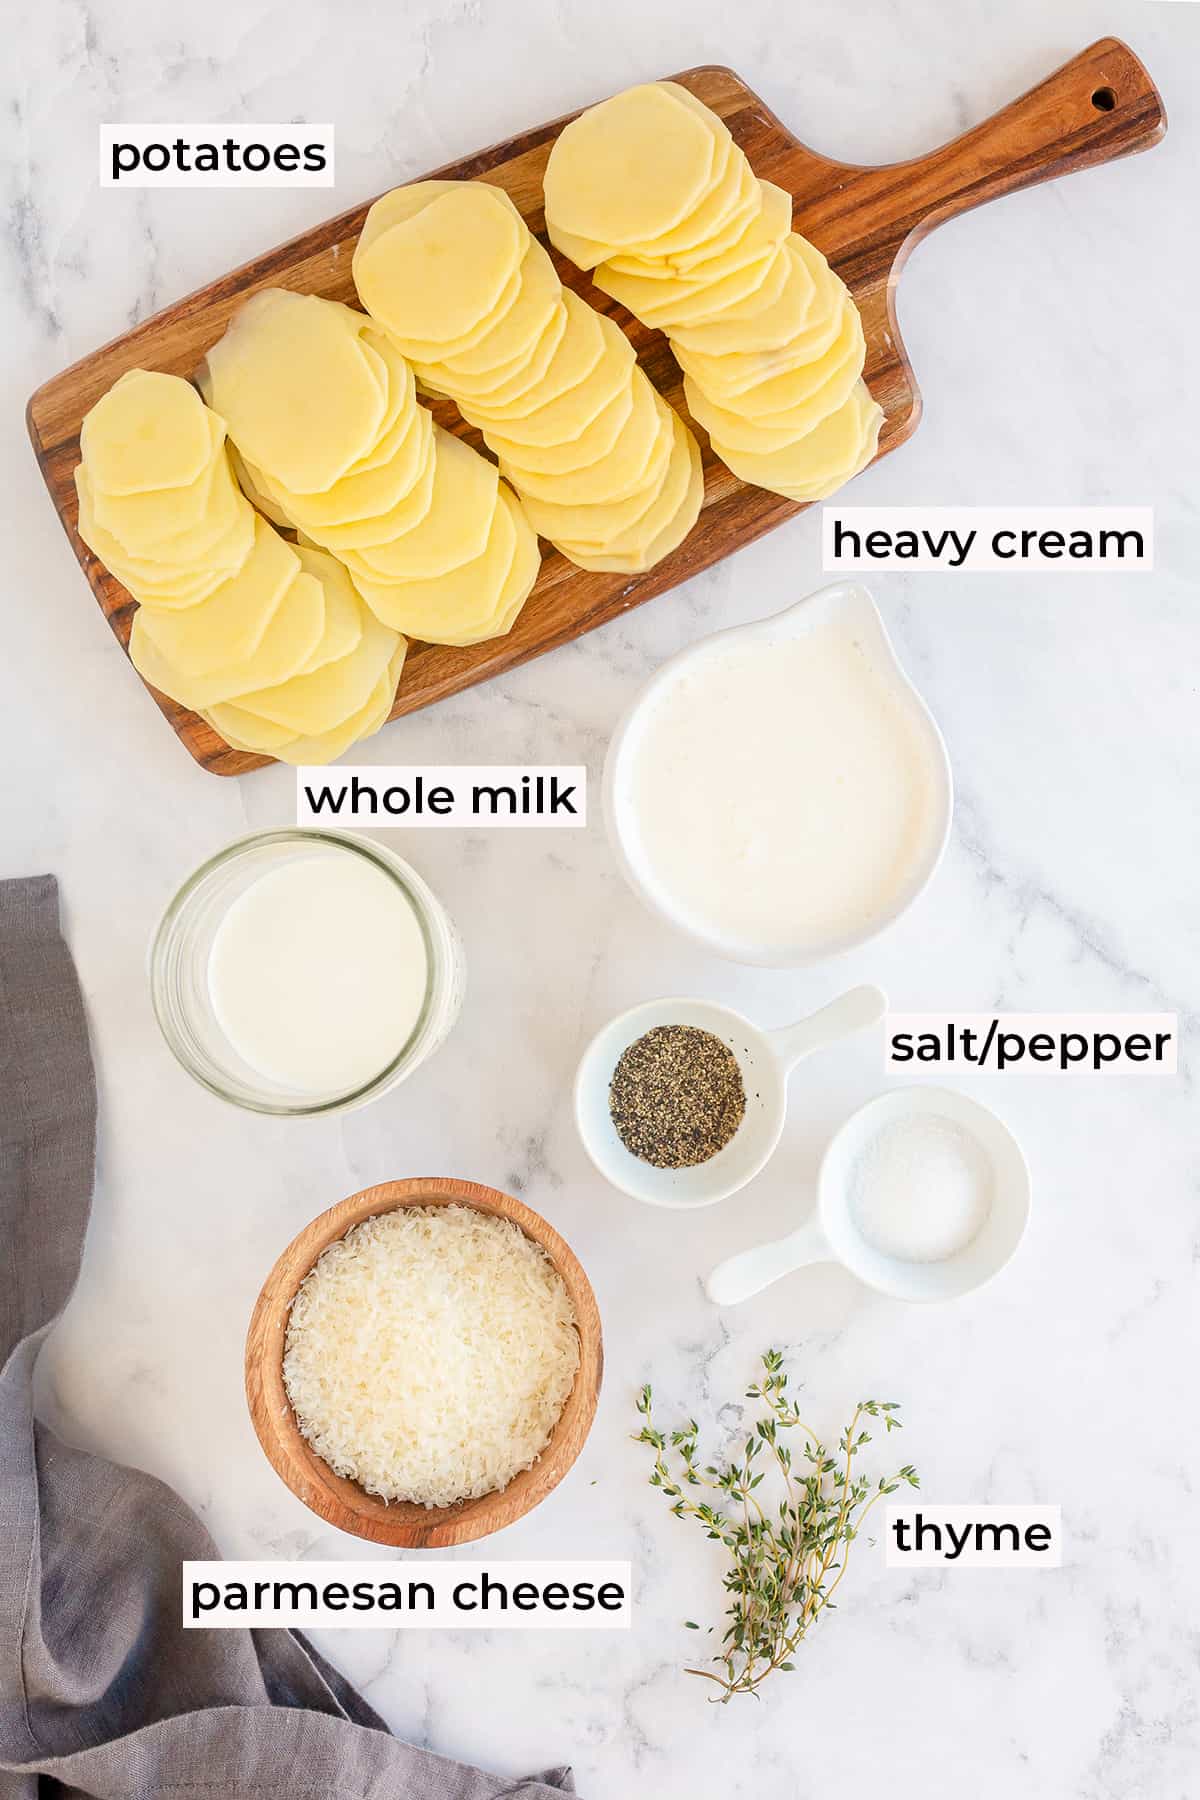 The ingredients needed to make Scalloped Potatoes.